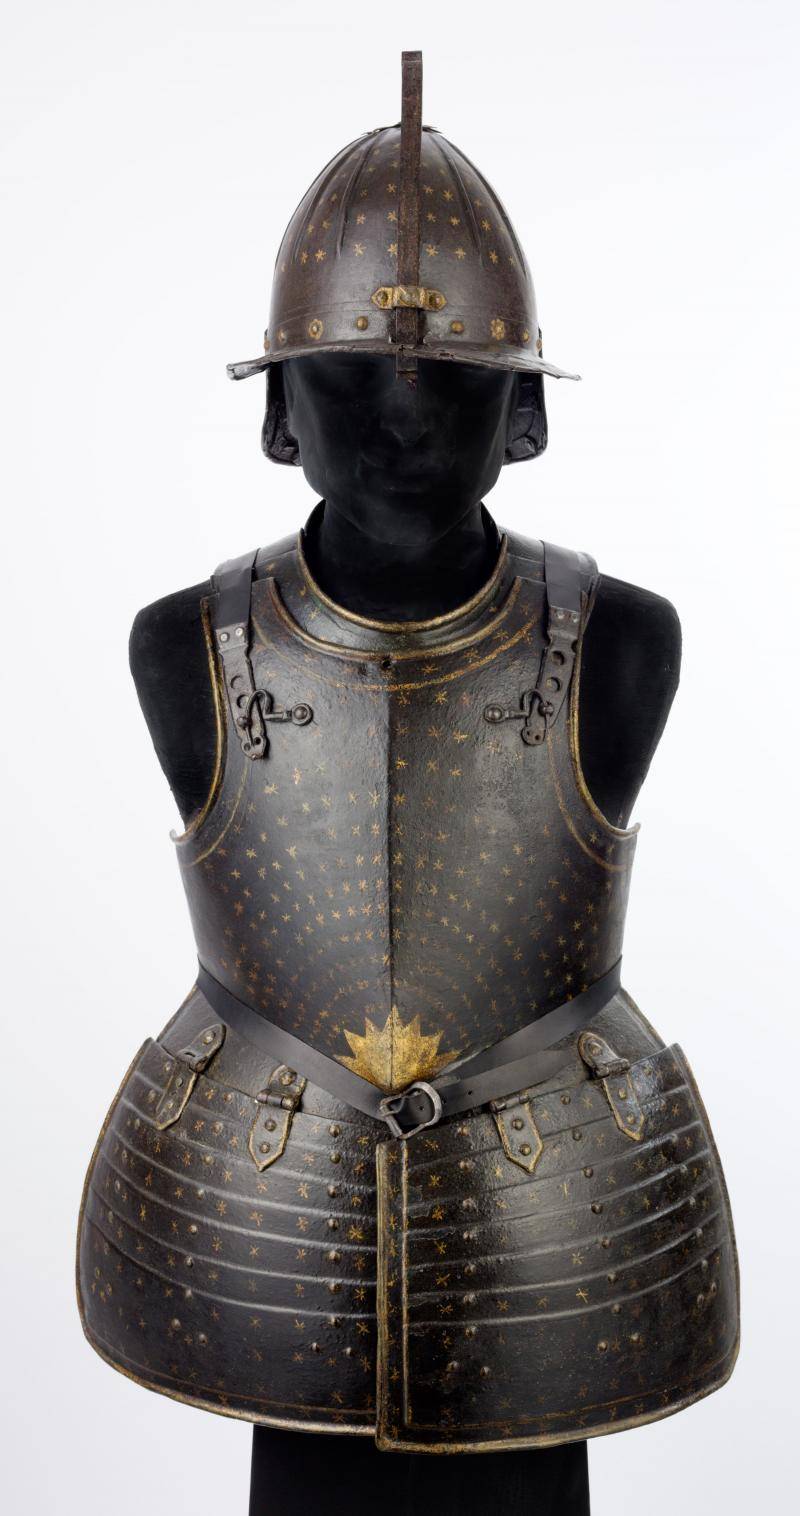 Mannequin displaying steel and iron armor complete with helmet